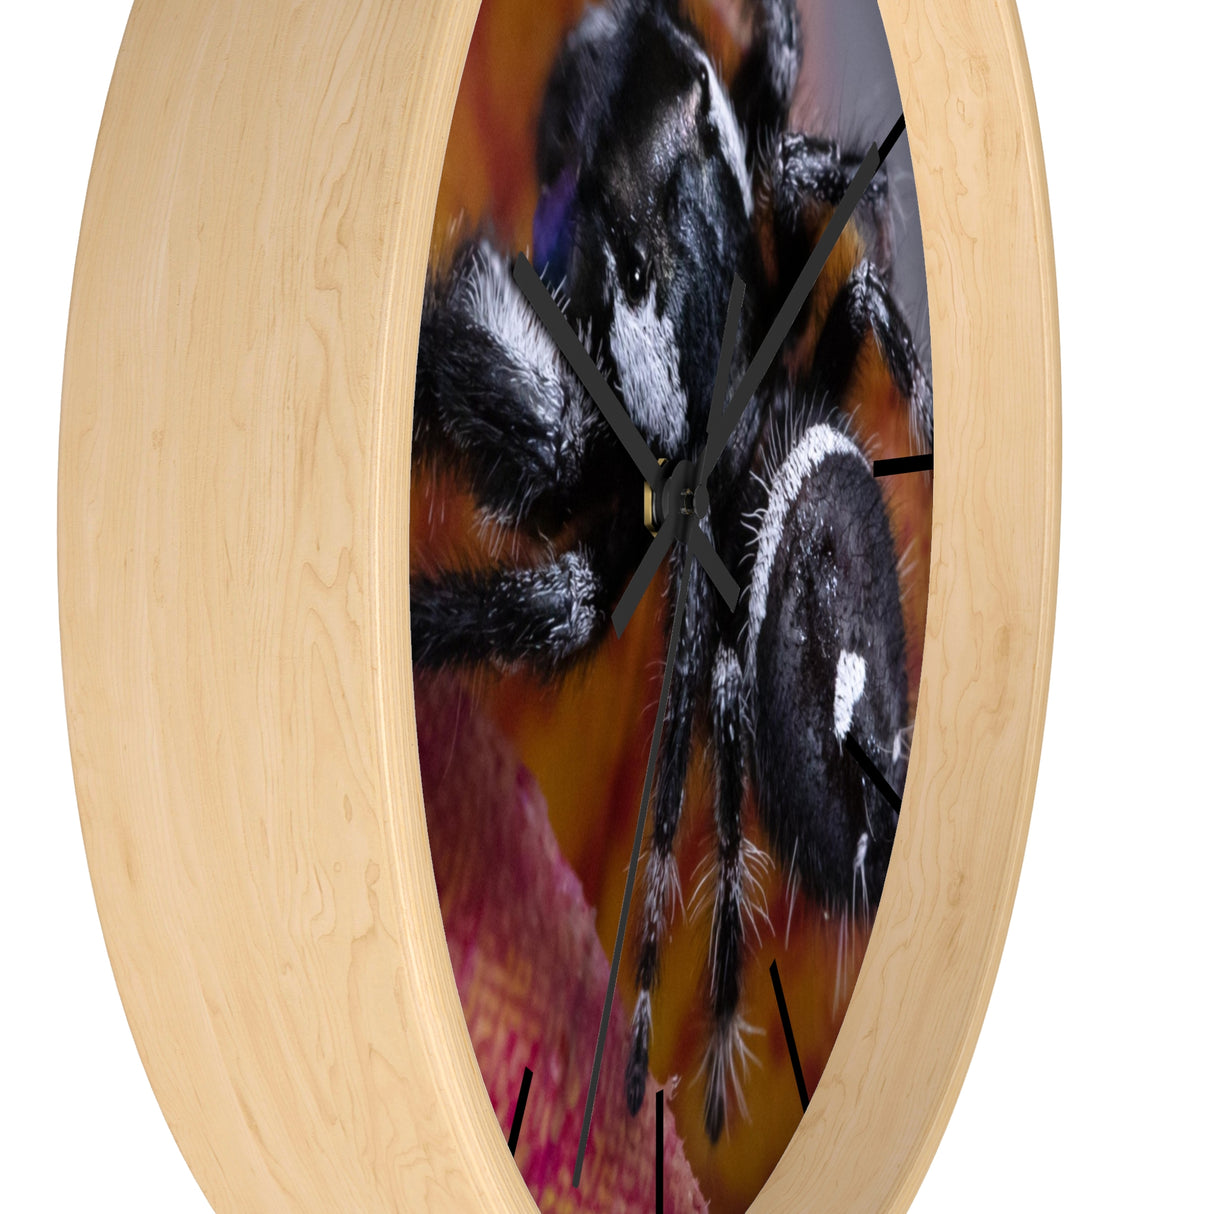 Wall clock with BFP spider print